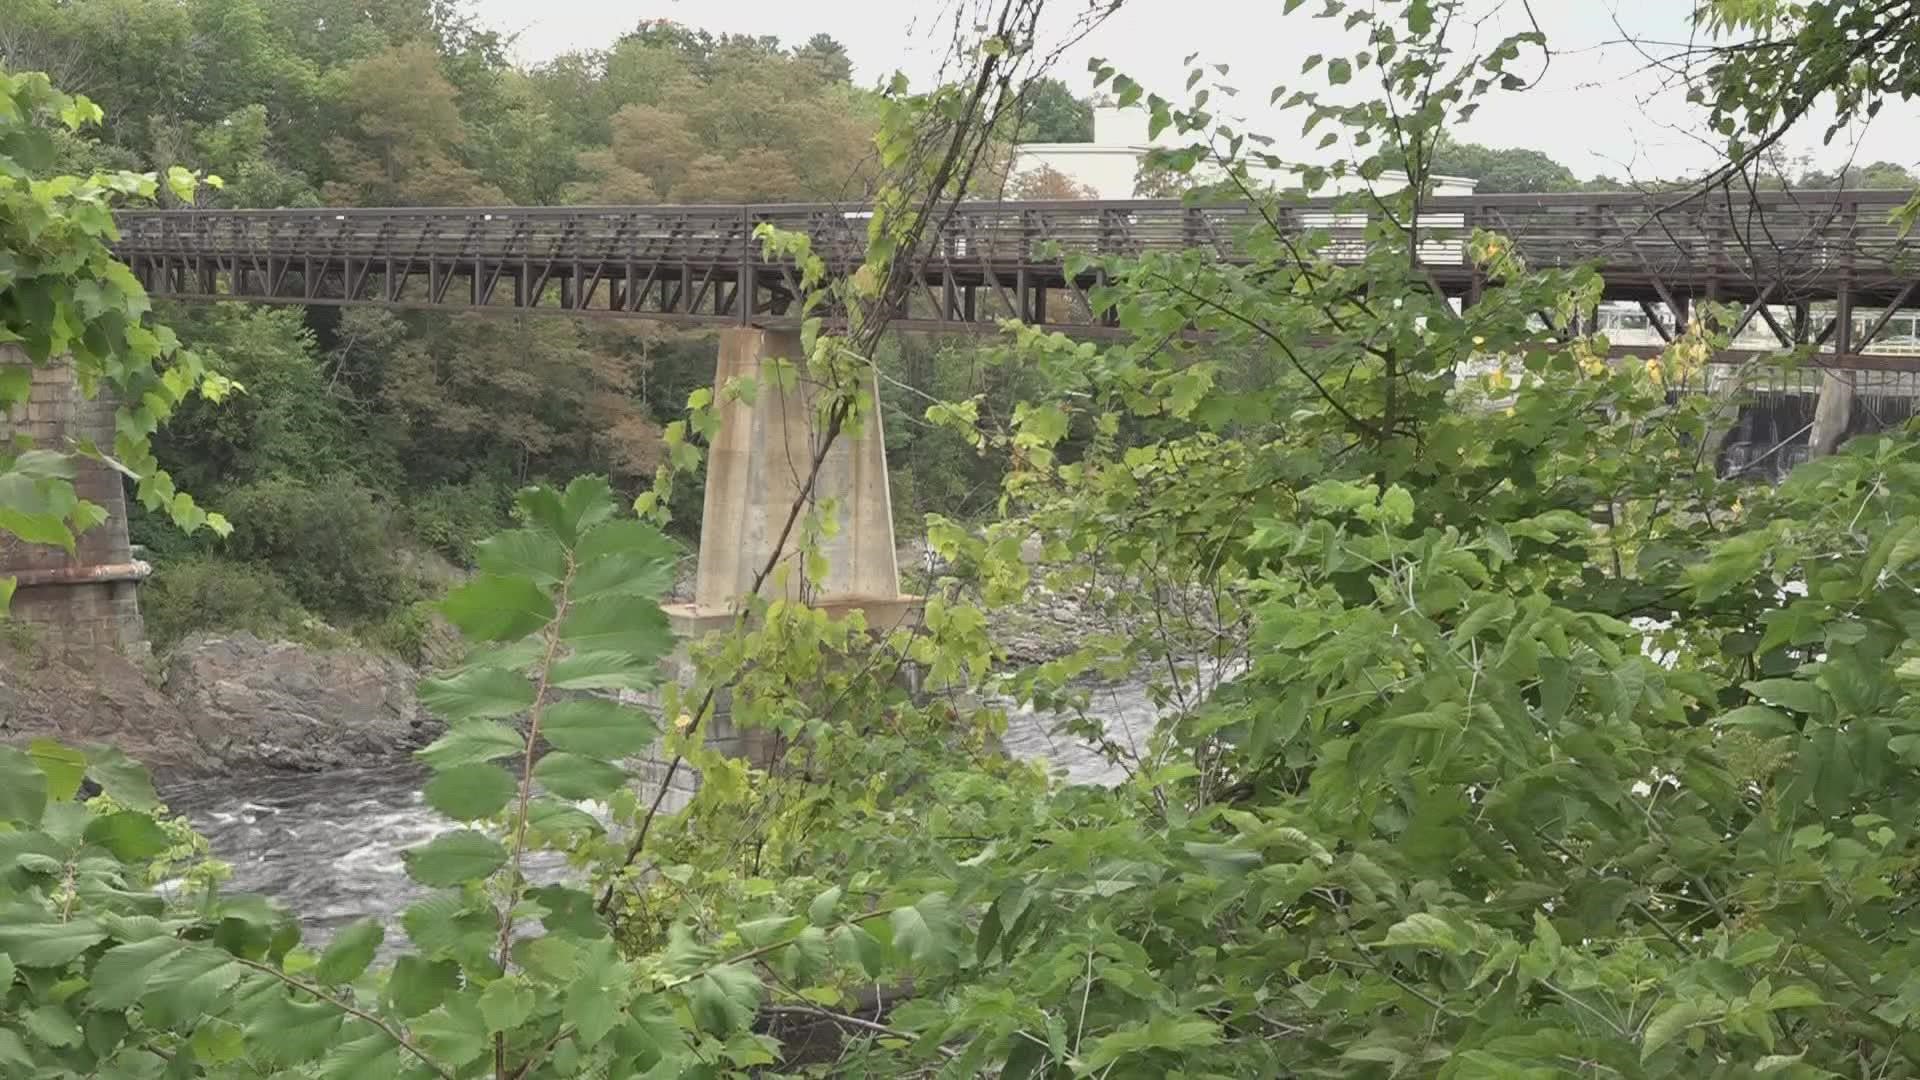 Skowhegan is looking to spruce up its riverfront and is inviting community members to share ideas and give feedback on designs.